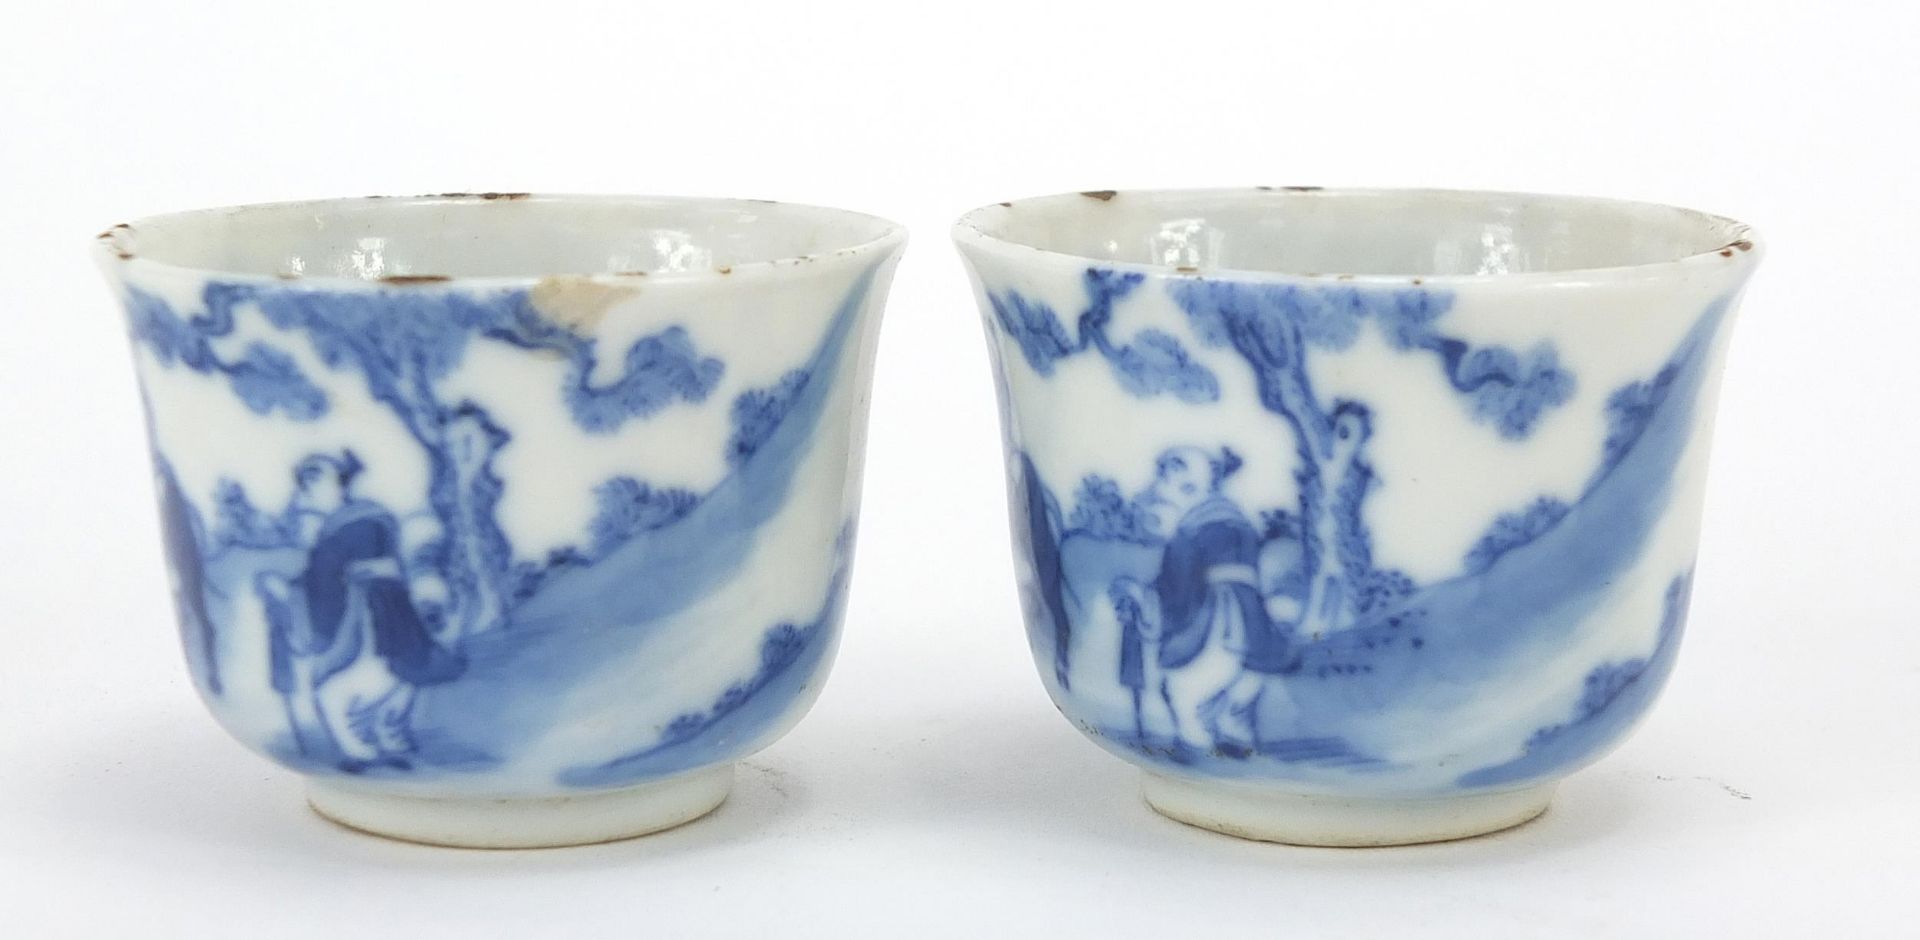 Pair of Chinese blue and white porcelain tea bowls, each hand painted with a figure on buffalo - Image 2 of 9